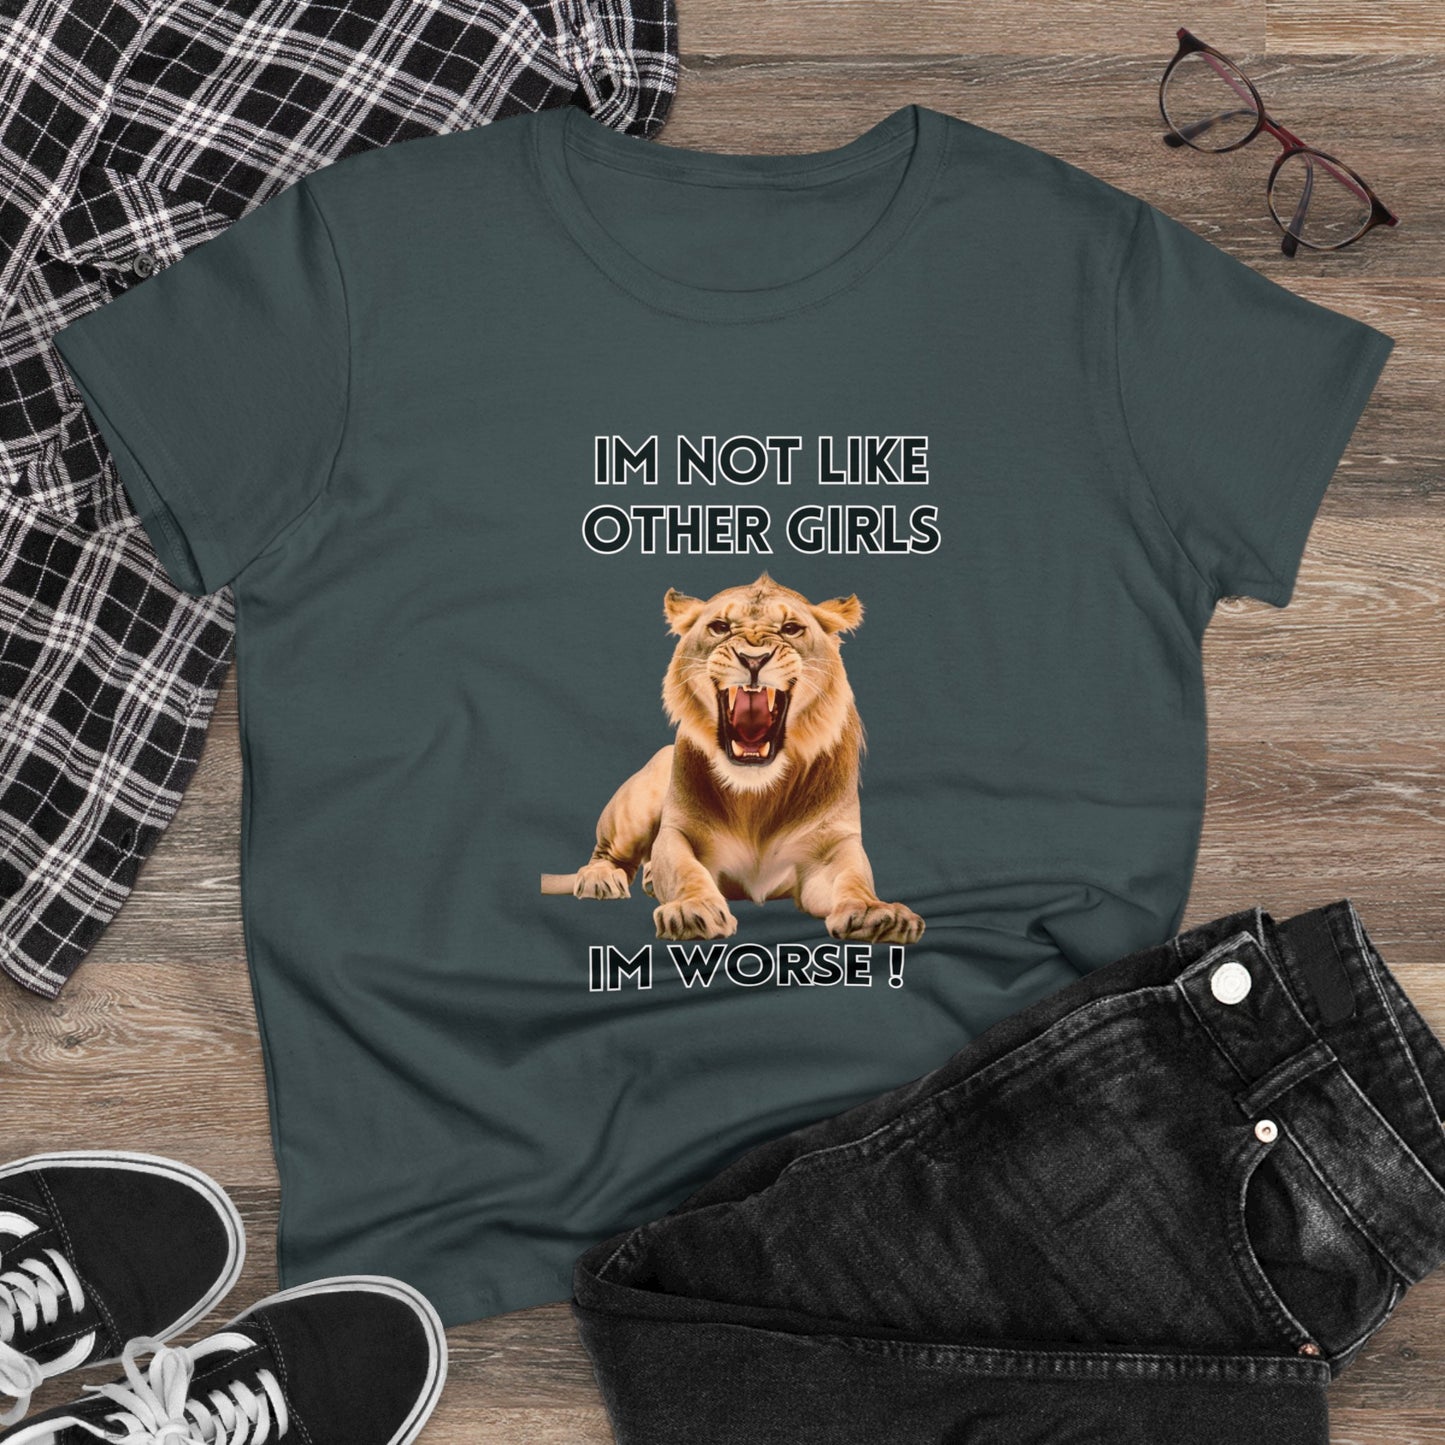 Angry Lion Funny T-Shirt - I'm Not Like Other Girls T-Shirt Charcoal S 